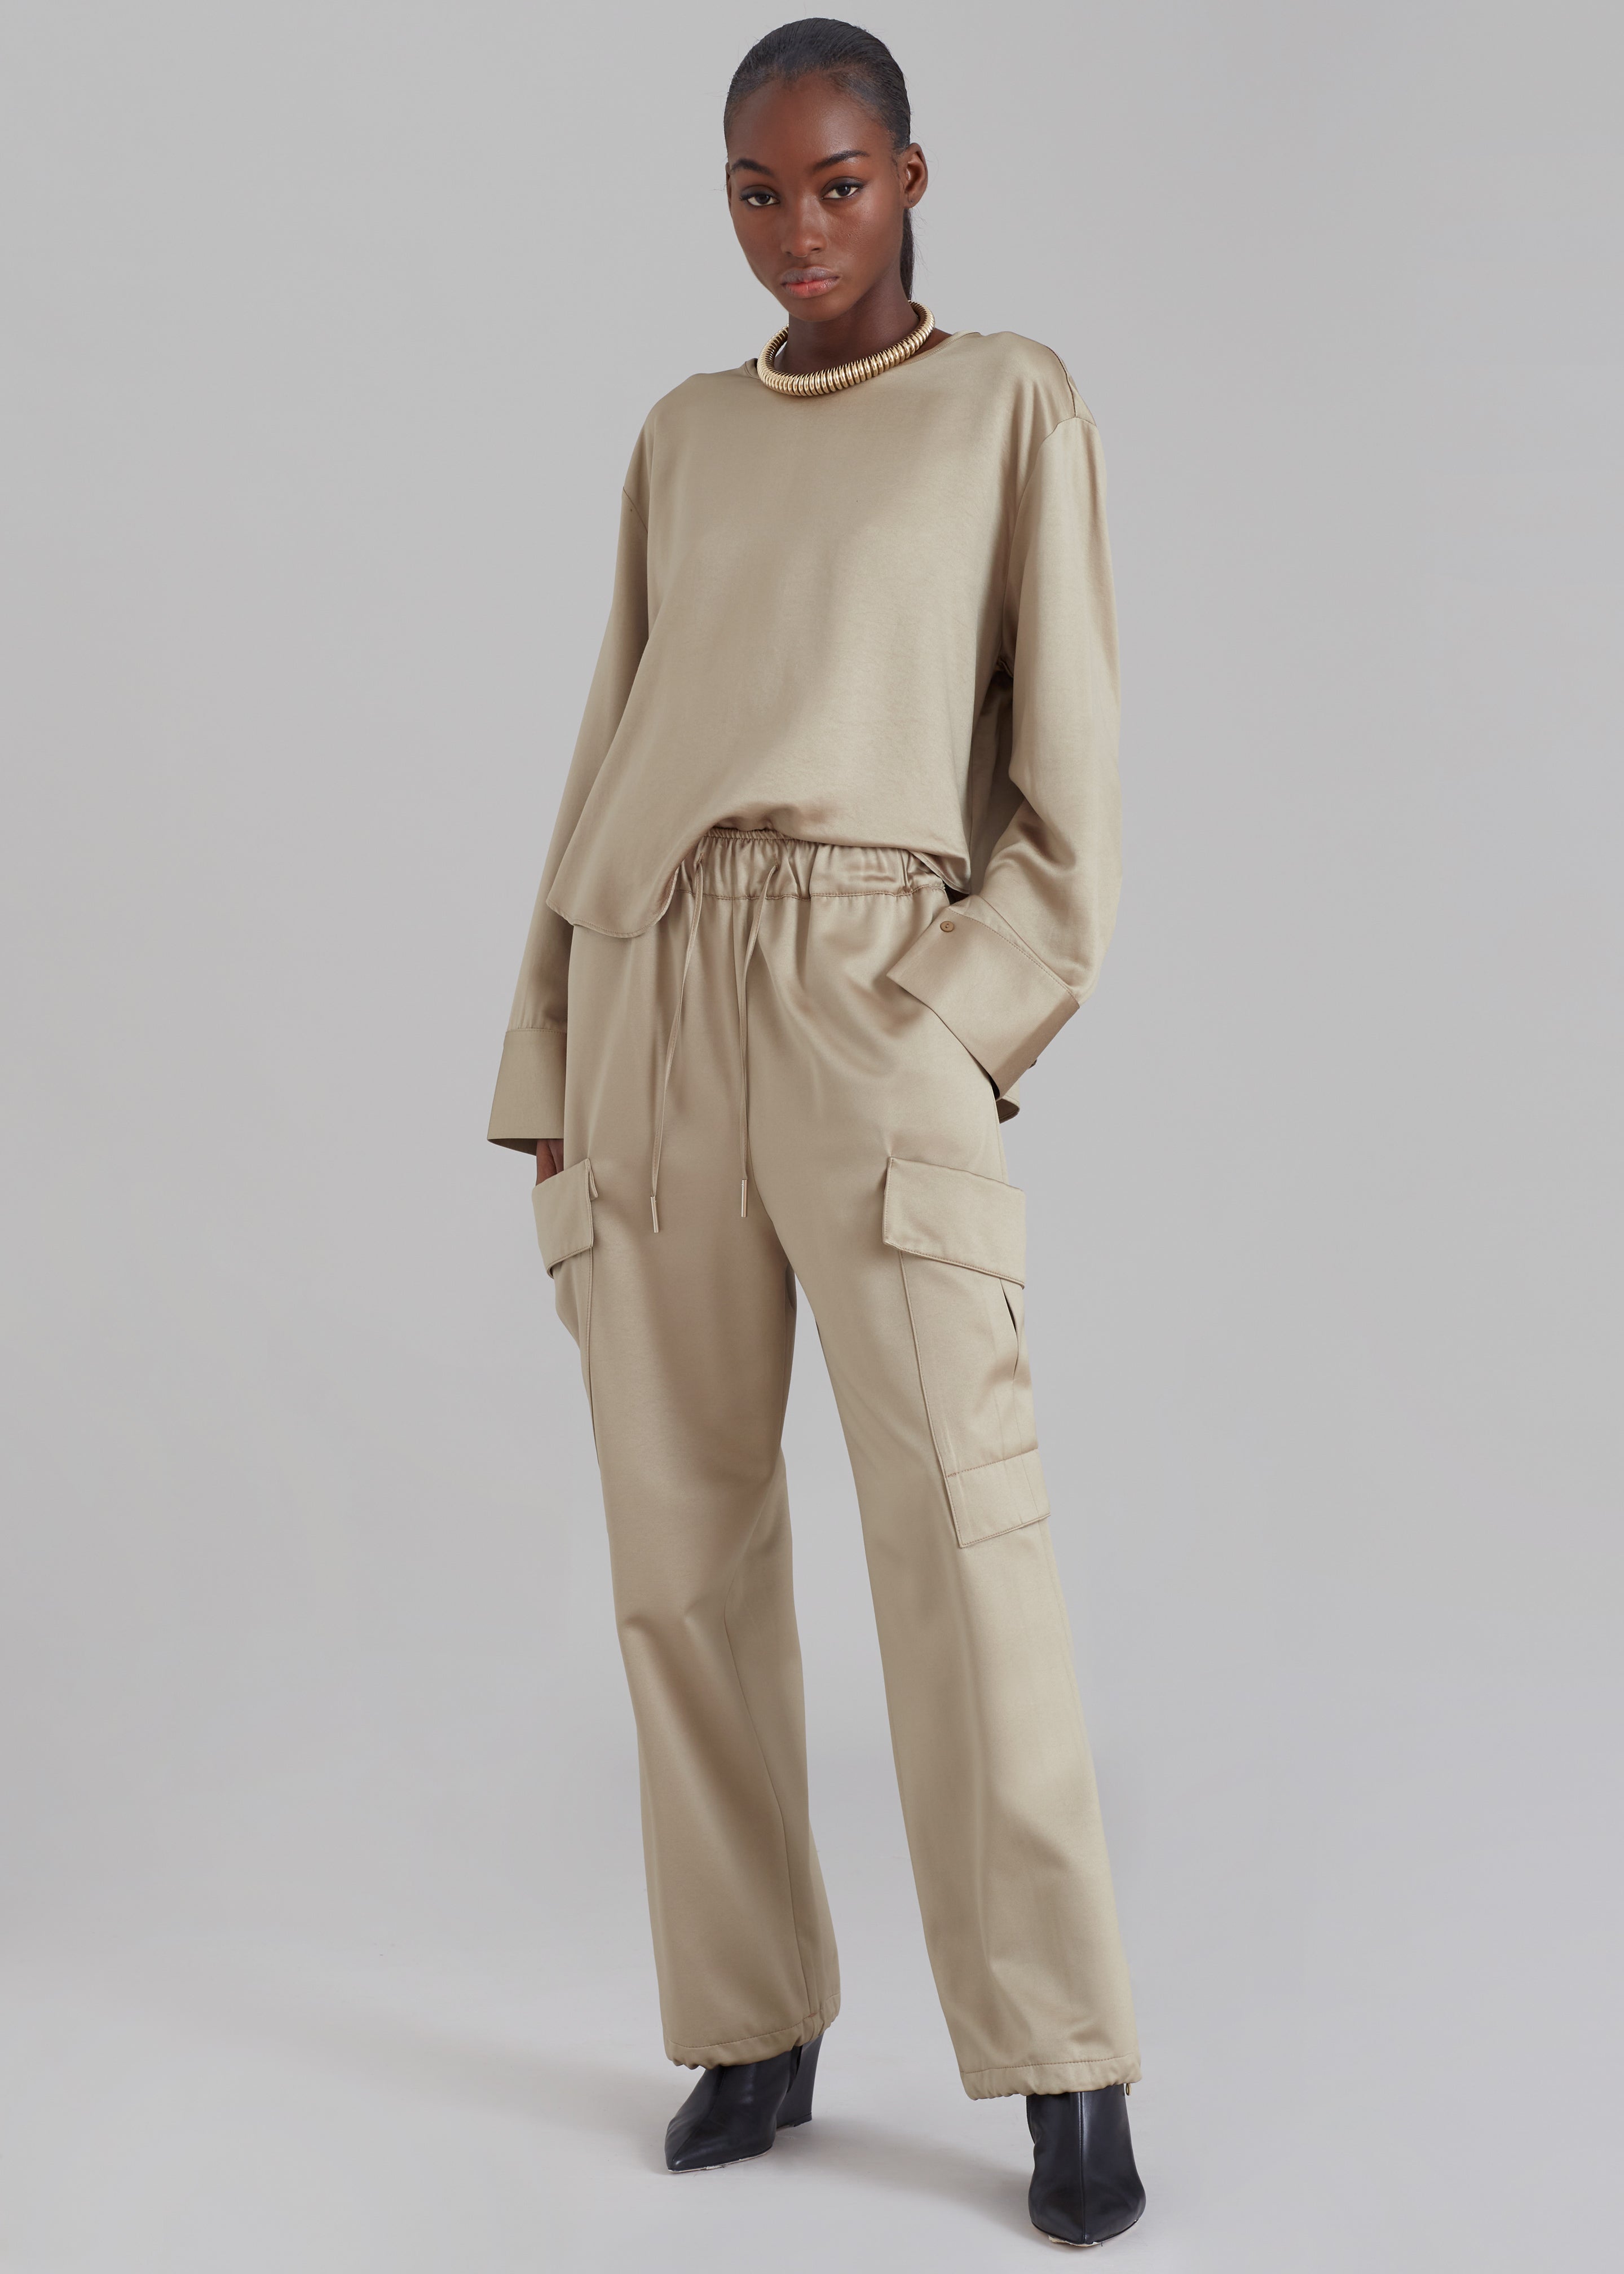 Cargo Pants and Utility Styling are the SS23 Trends that are Going ...